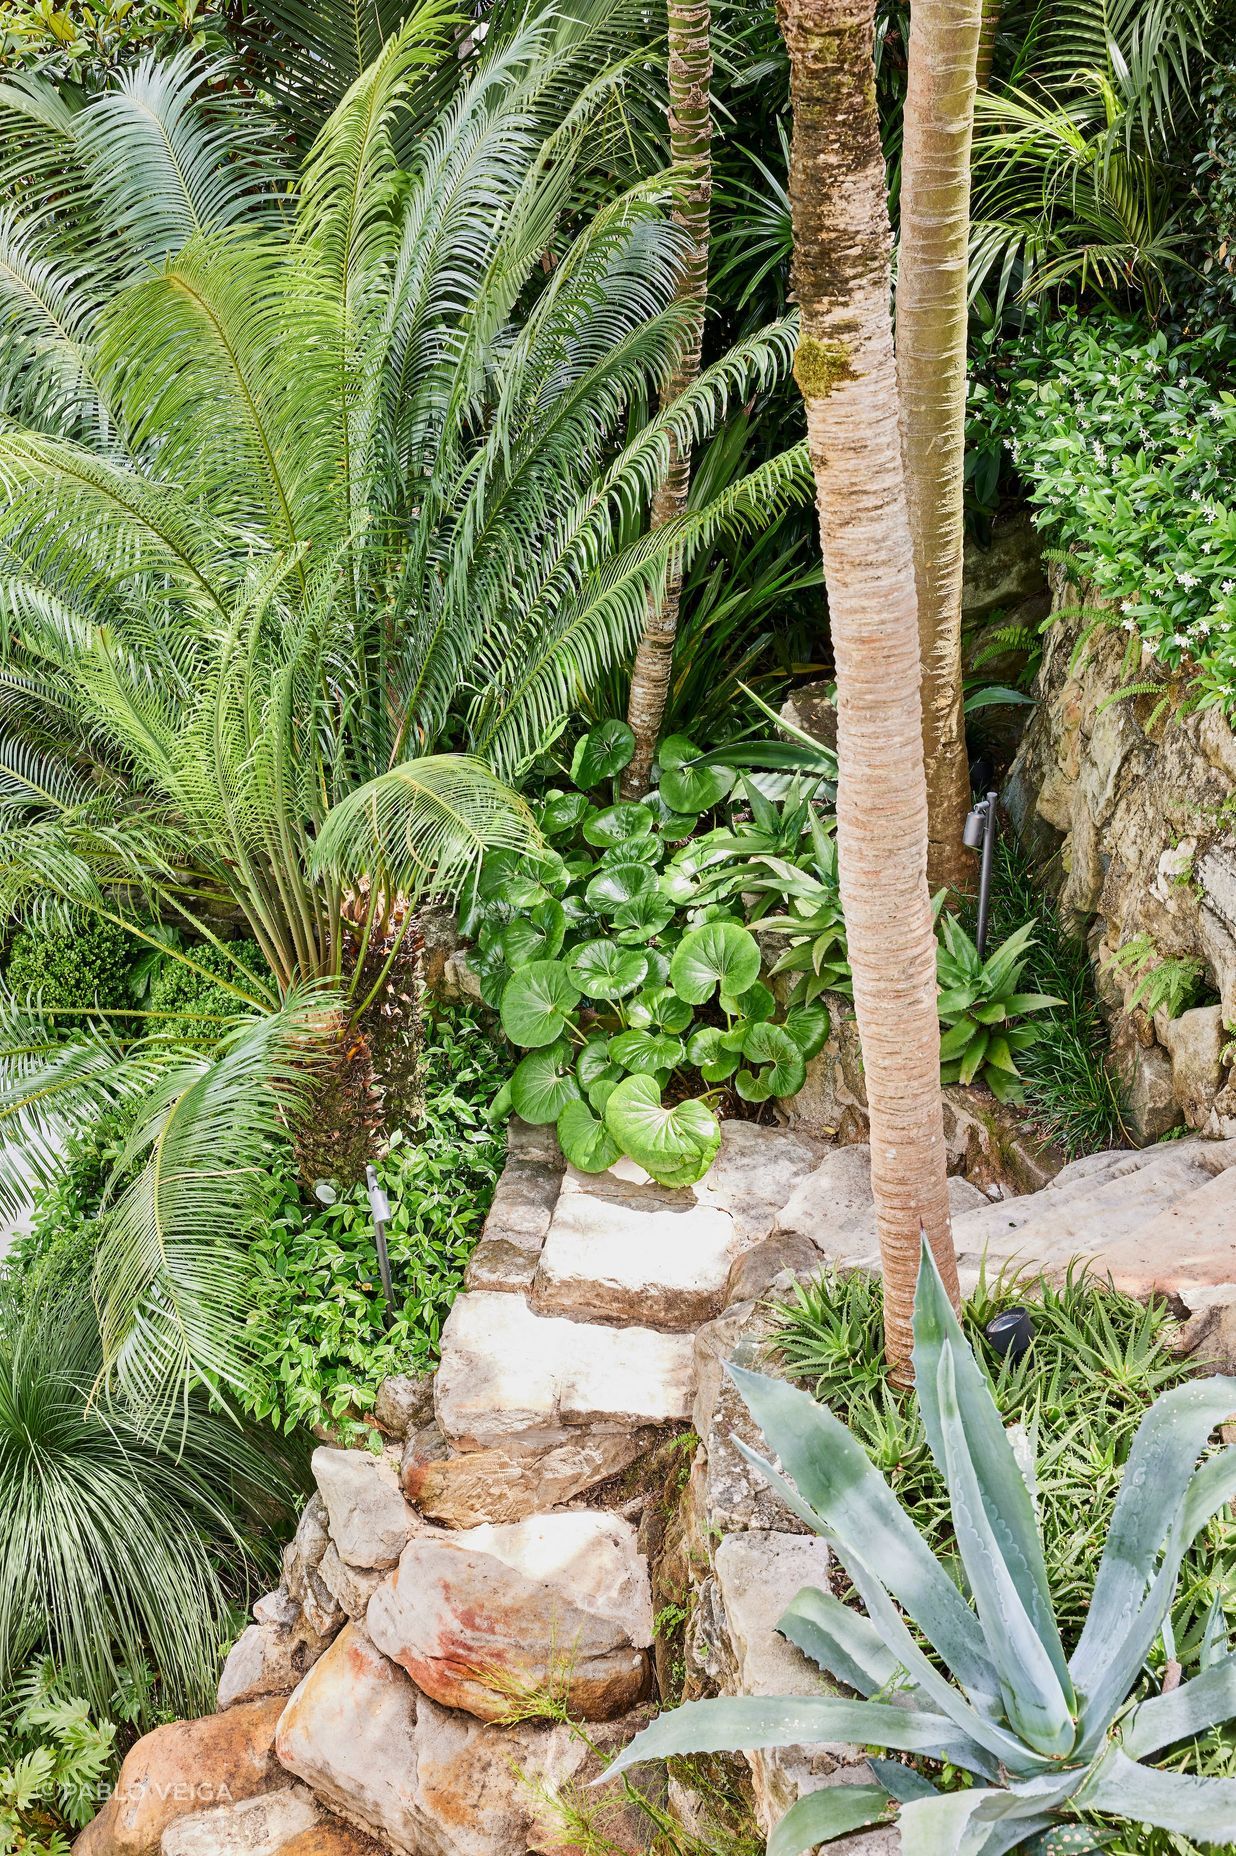 Pockets of interesting plantings can be found in the rockery surrounding the home.